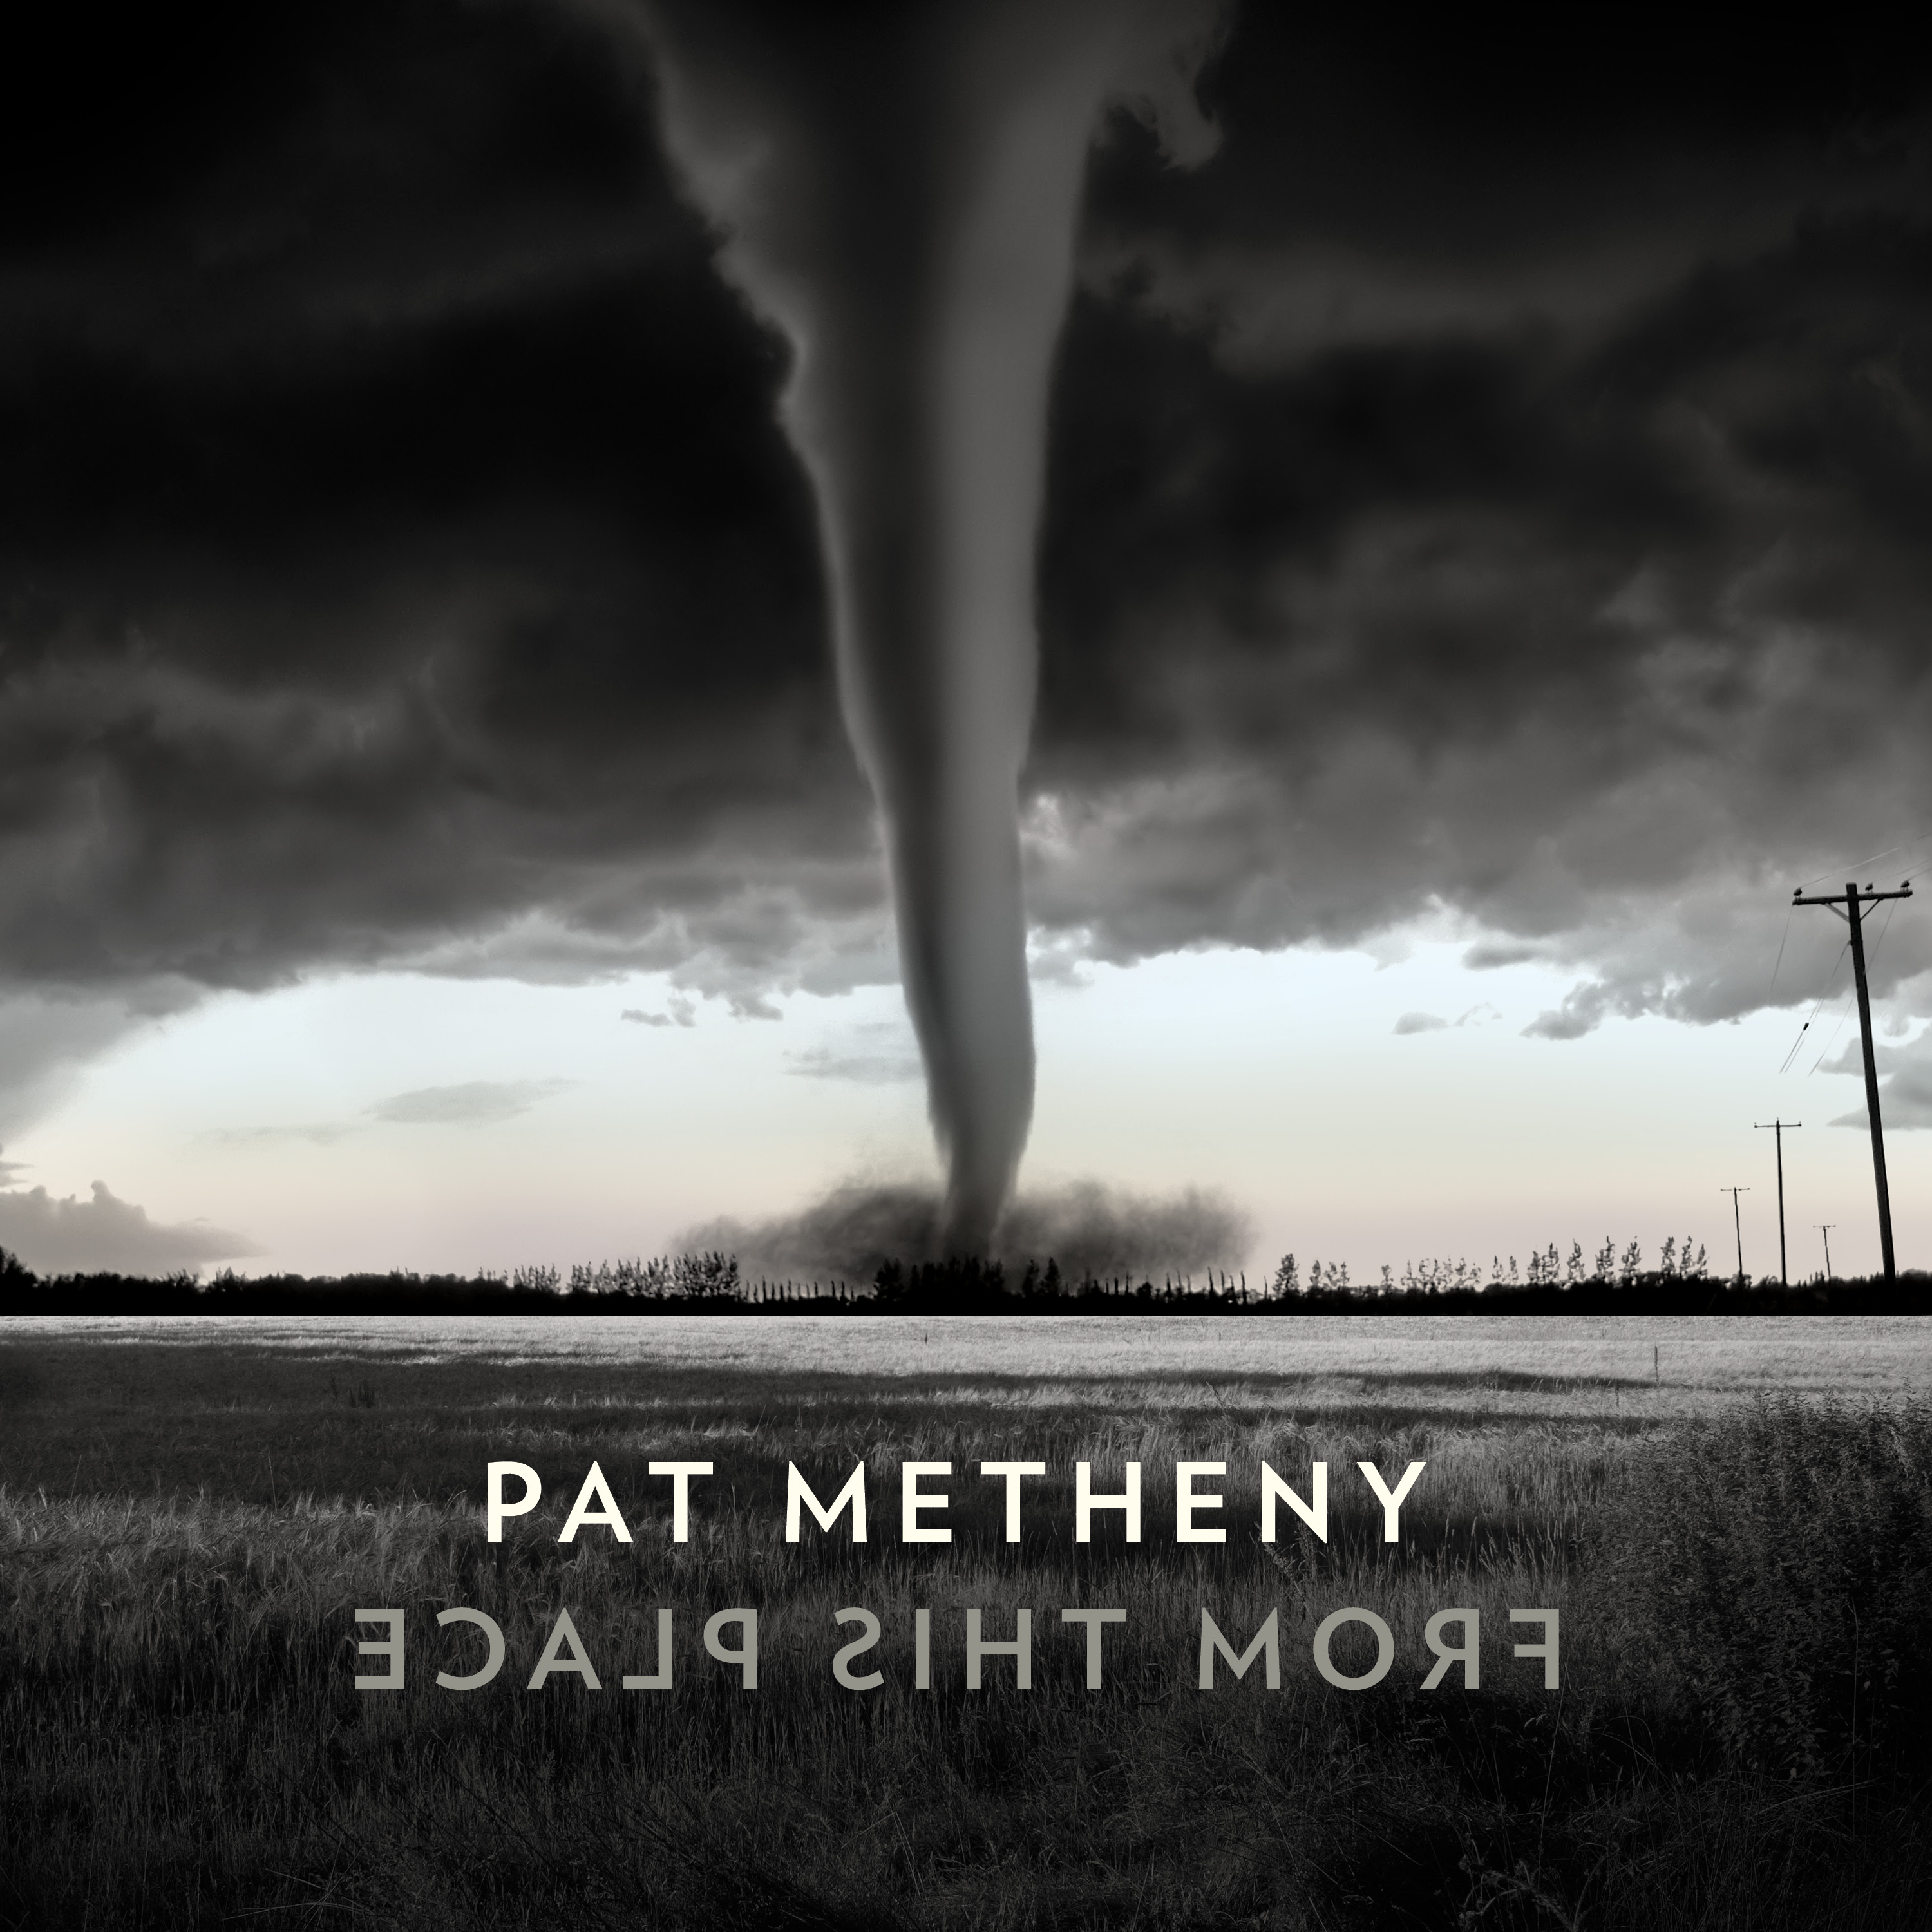 pat metheny group tour history